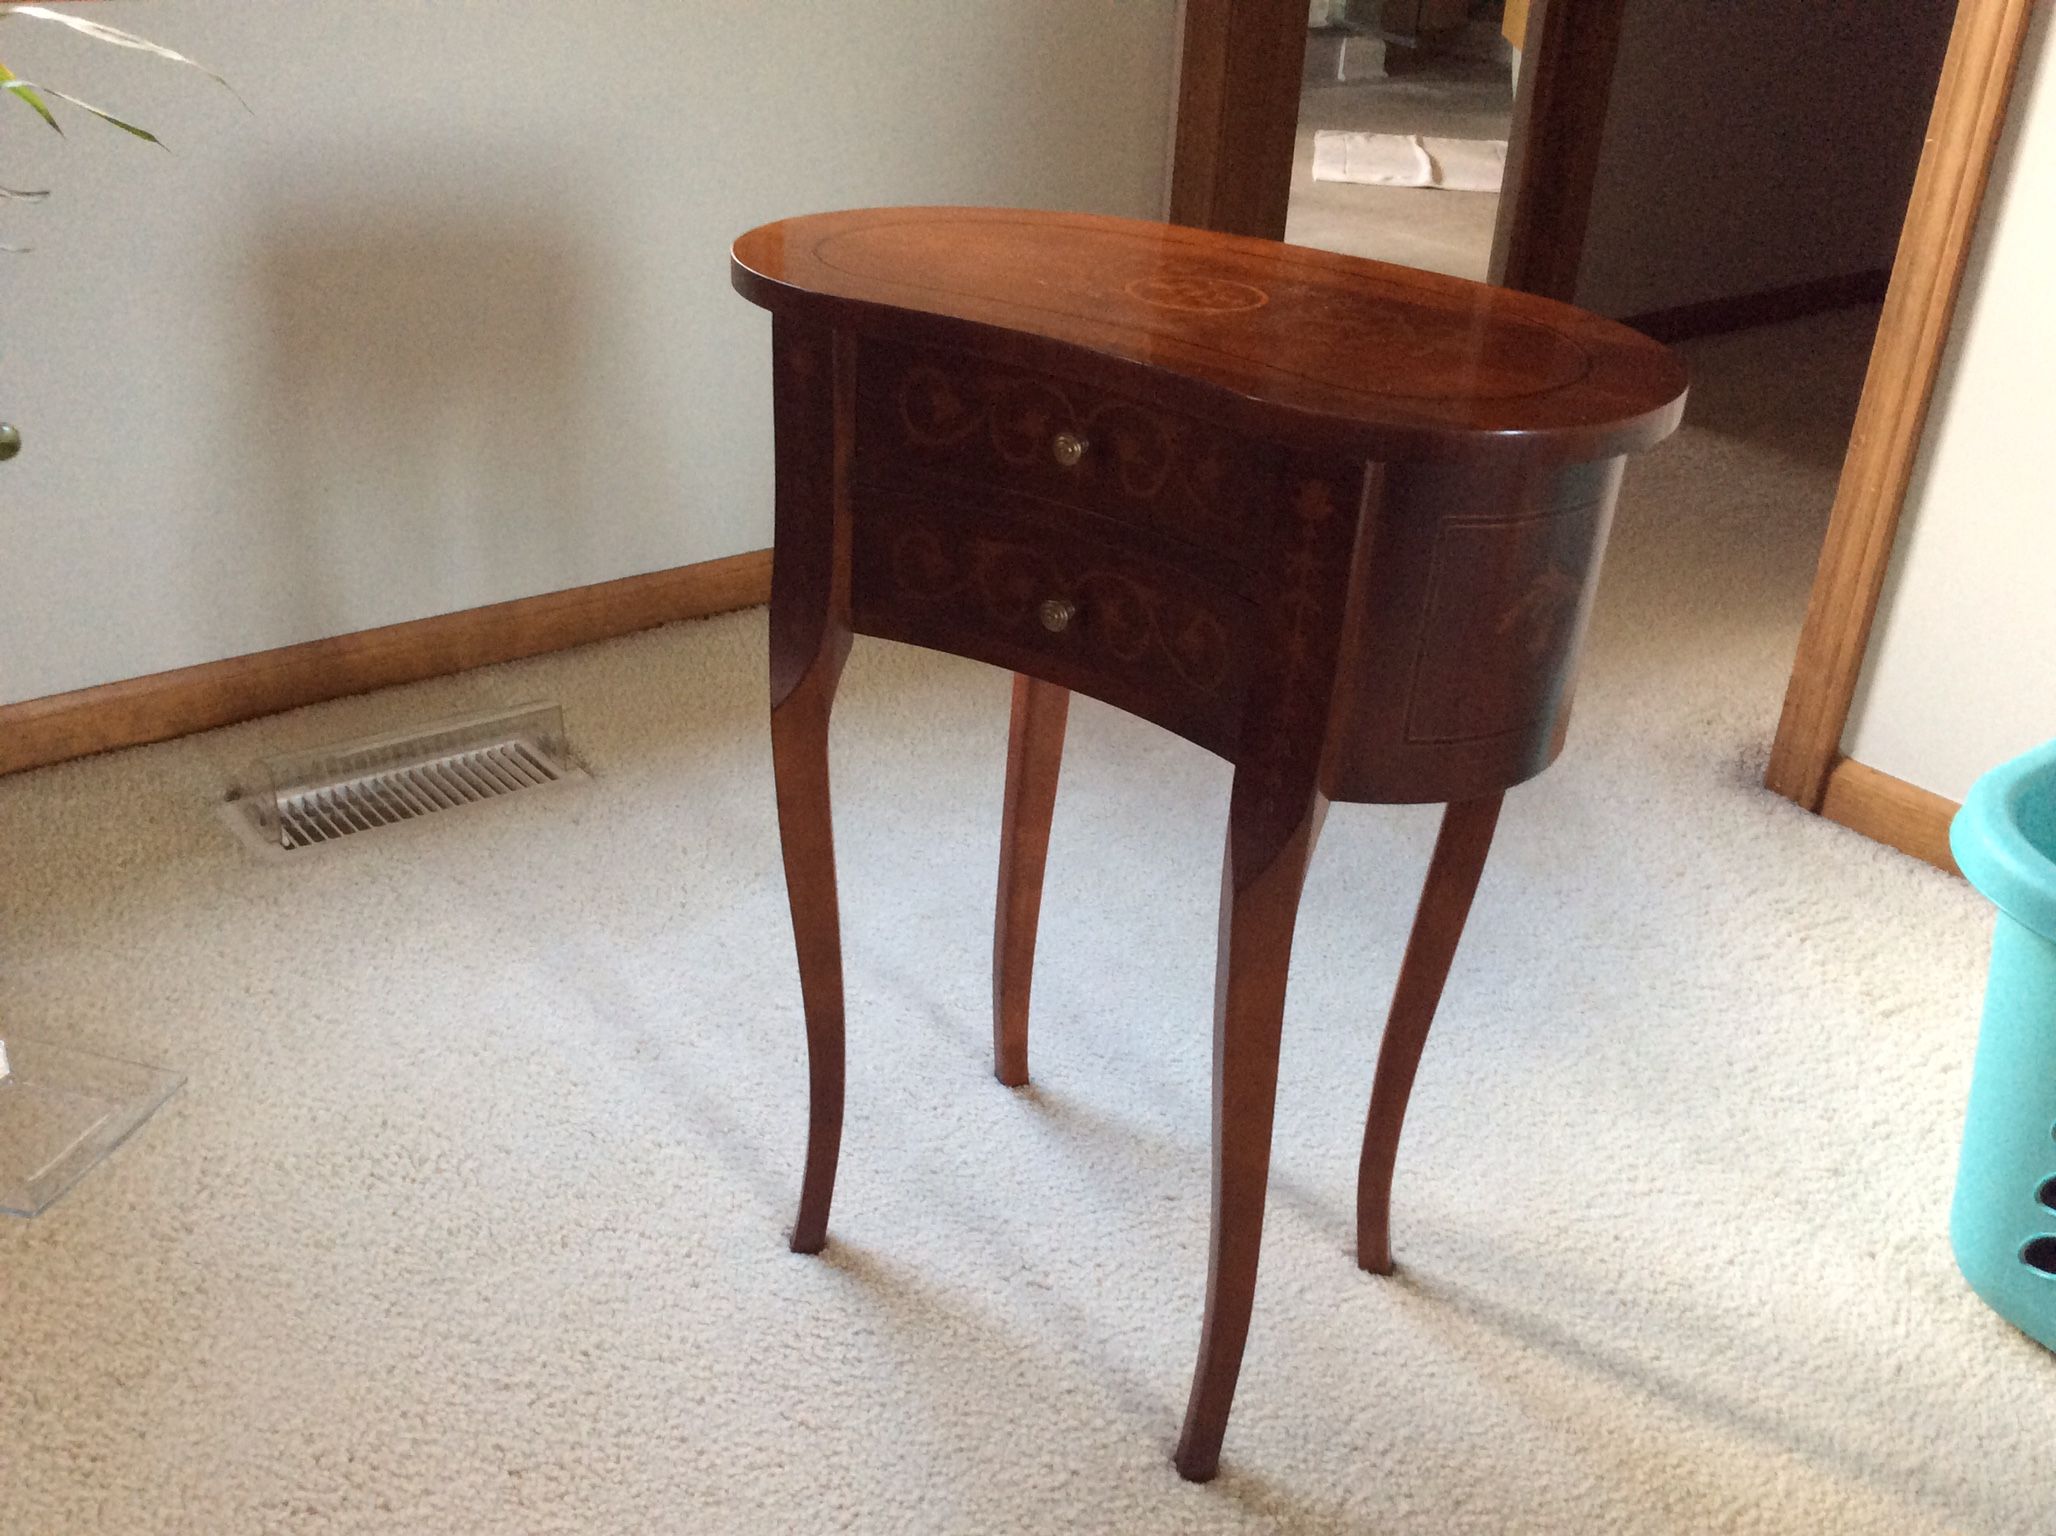 Reproduction Small Table